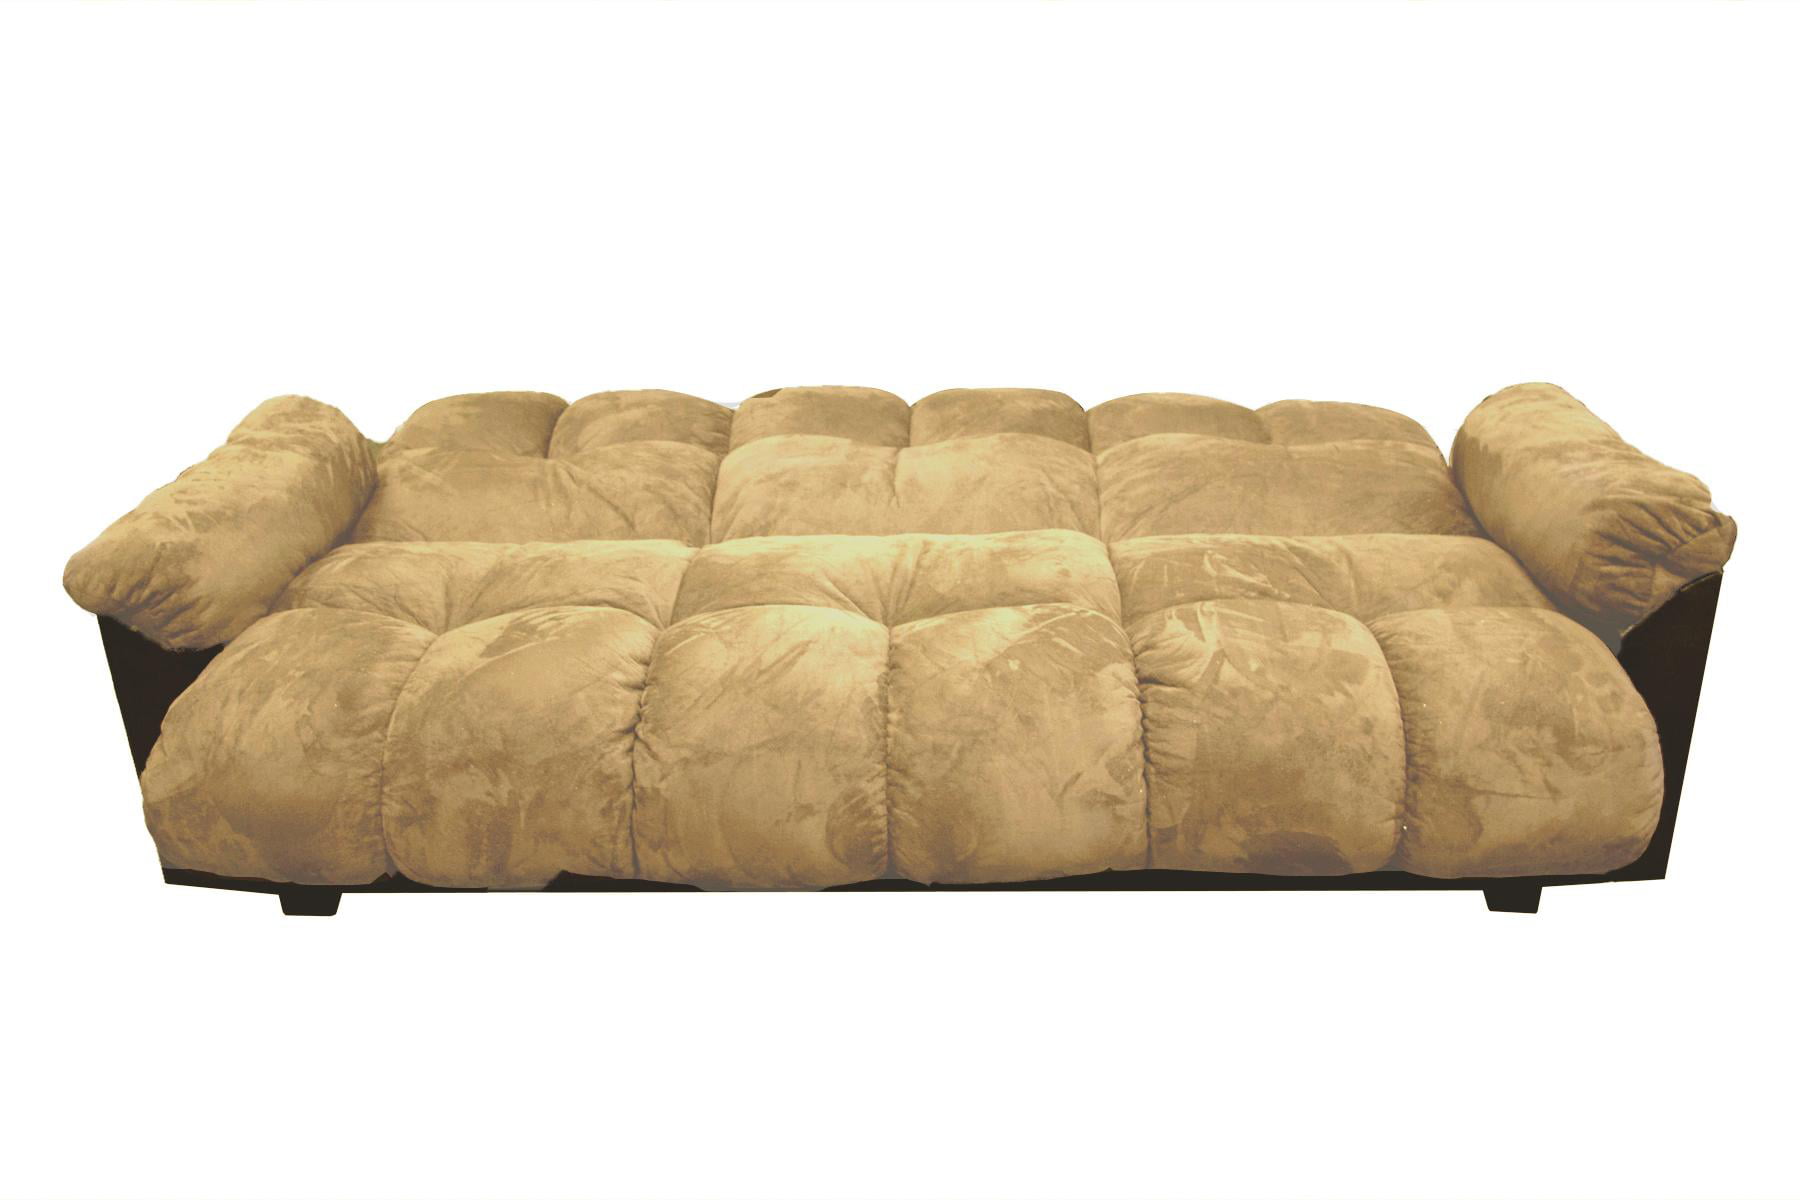 Milton Green Star London Sofa Bed With